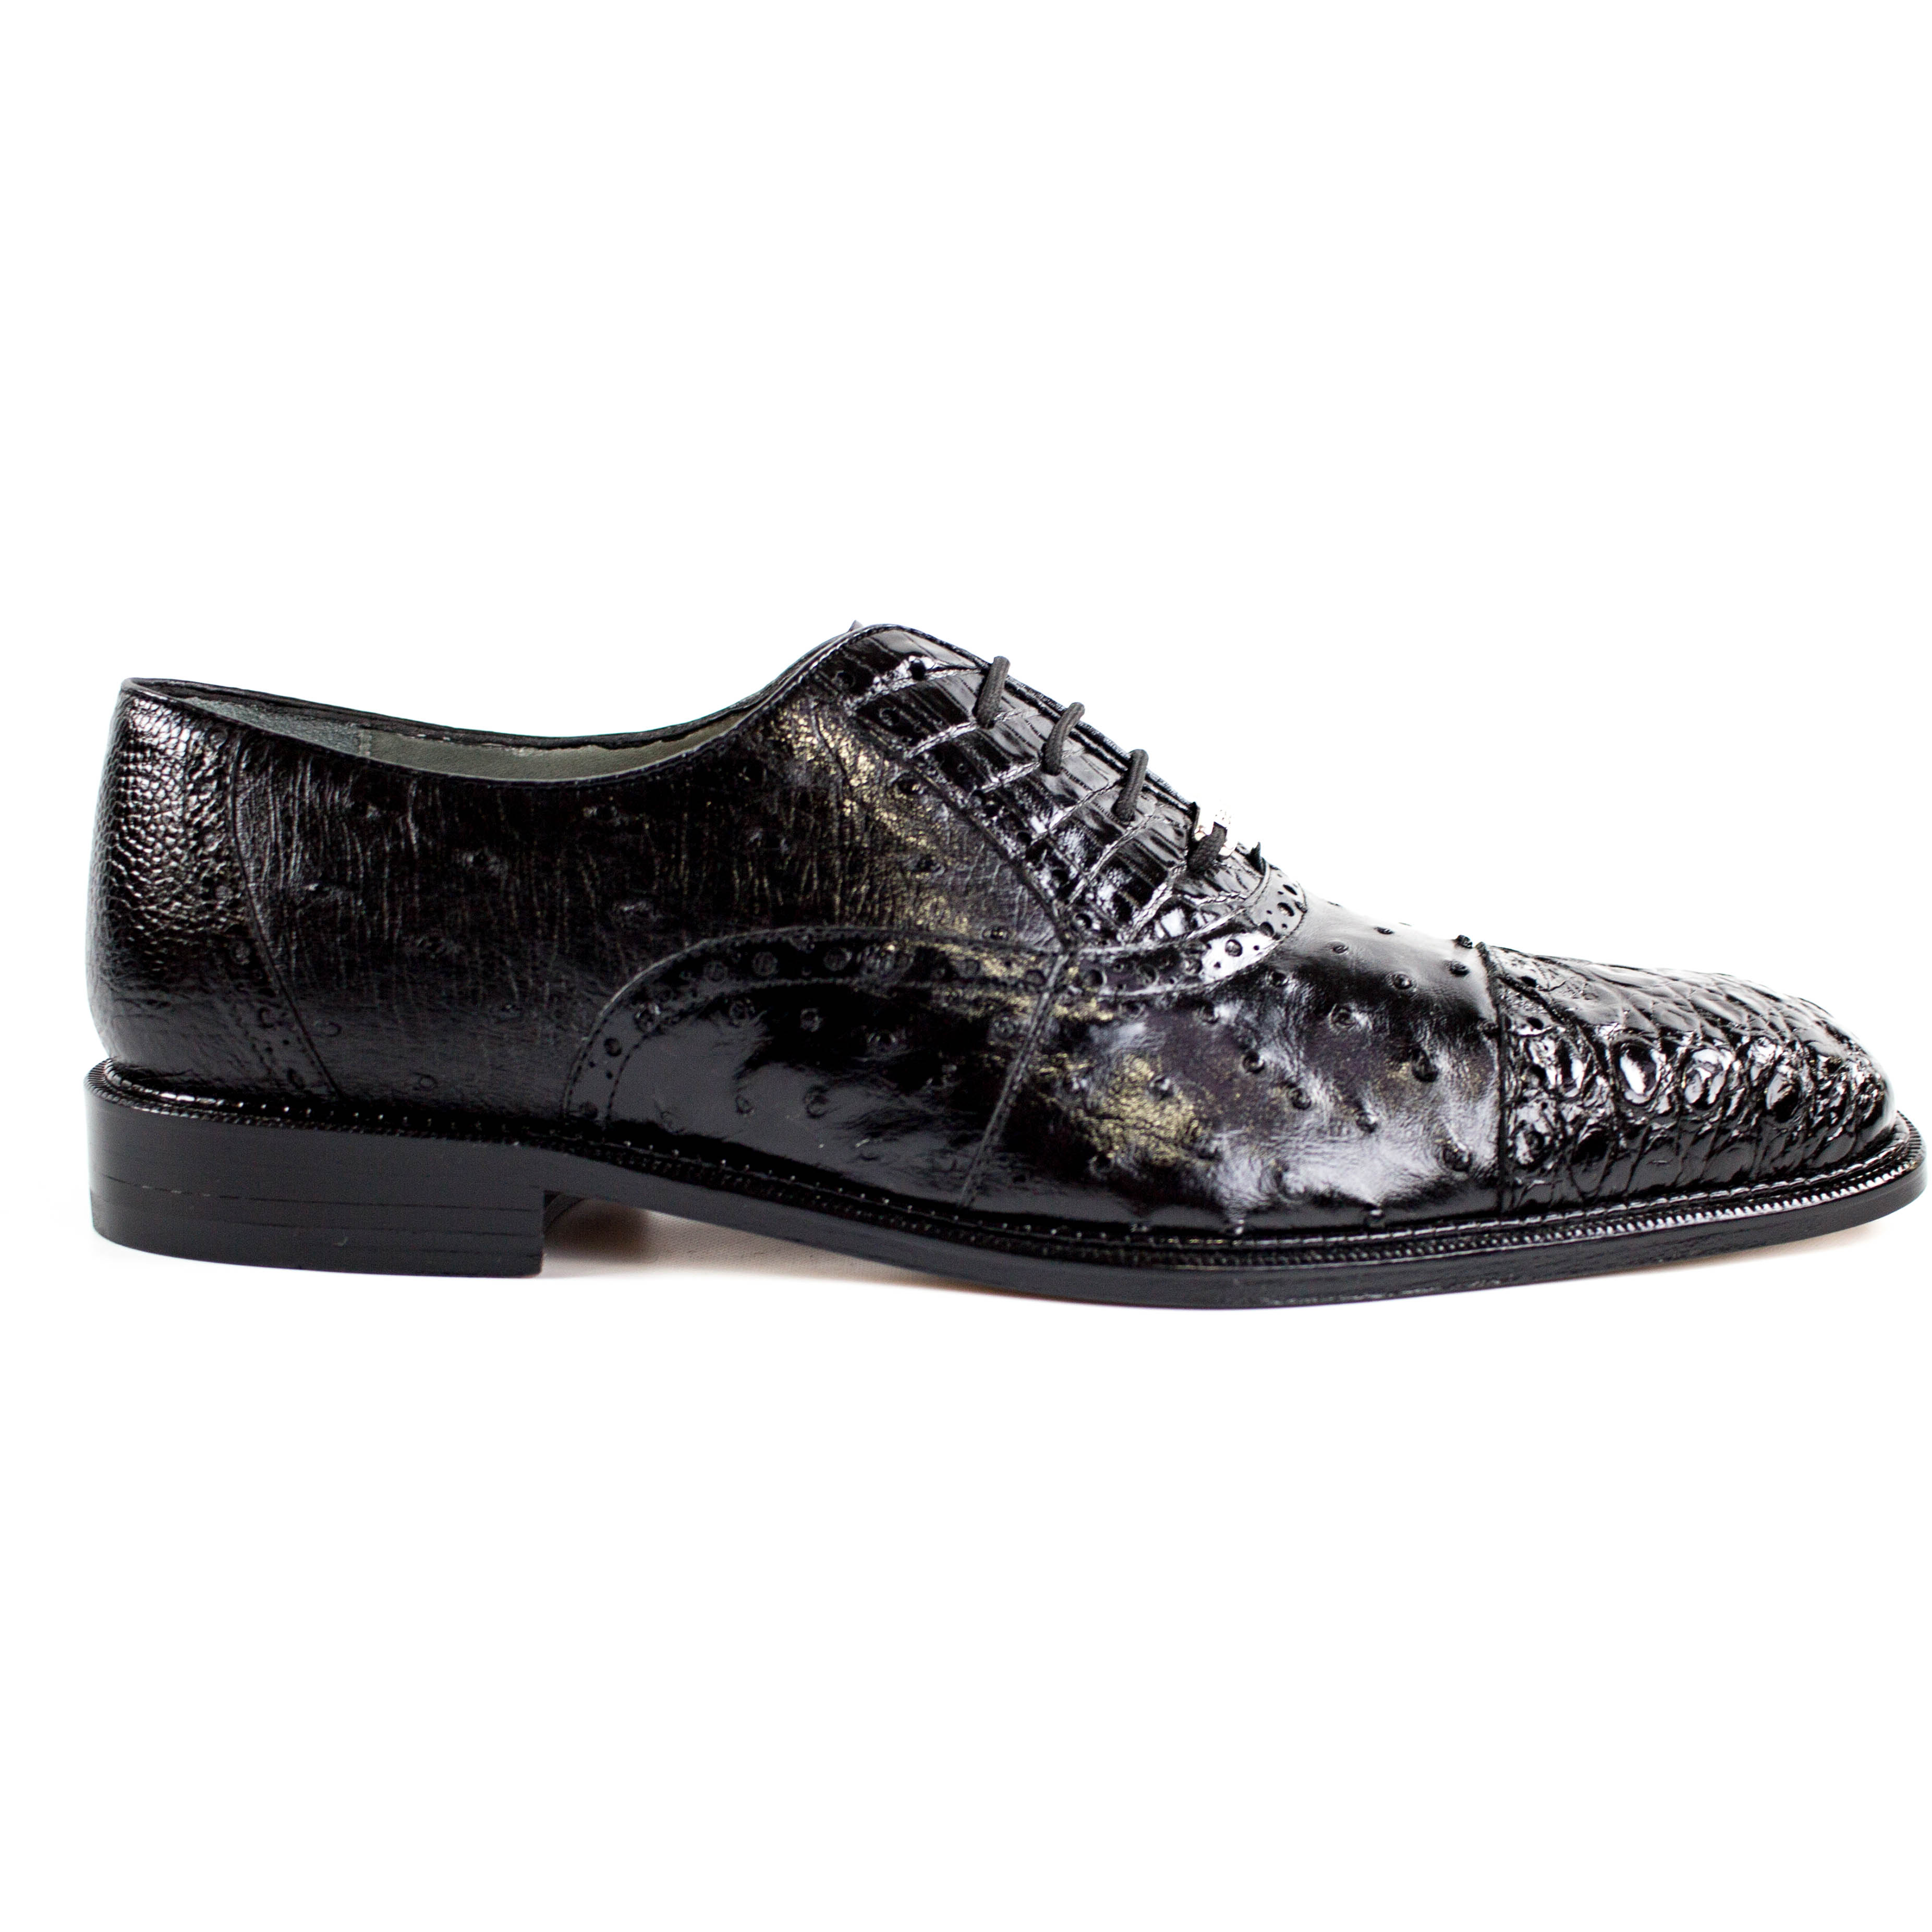 crocodile and ostrich shoes